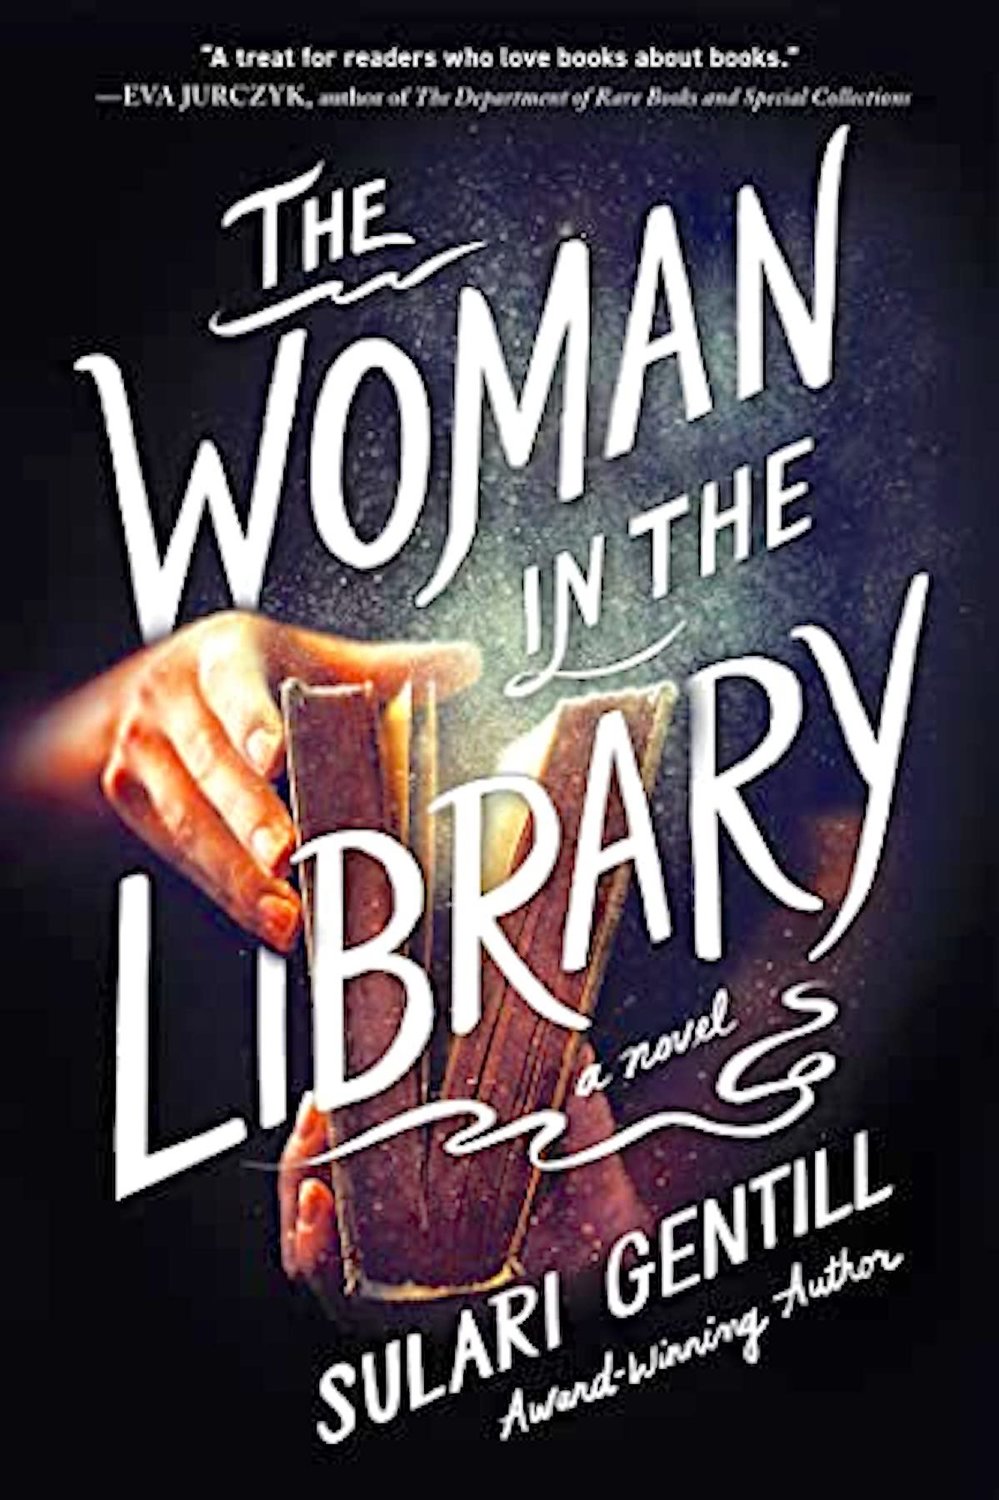 Mid-Day Mystery Book Discussion, “The Woman in the Library” by Sulari Gentill, will be held on Thursday, Oct. 13, at noon at Jervis